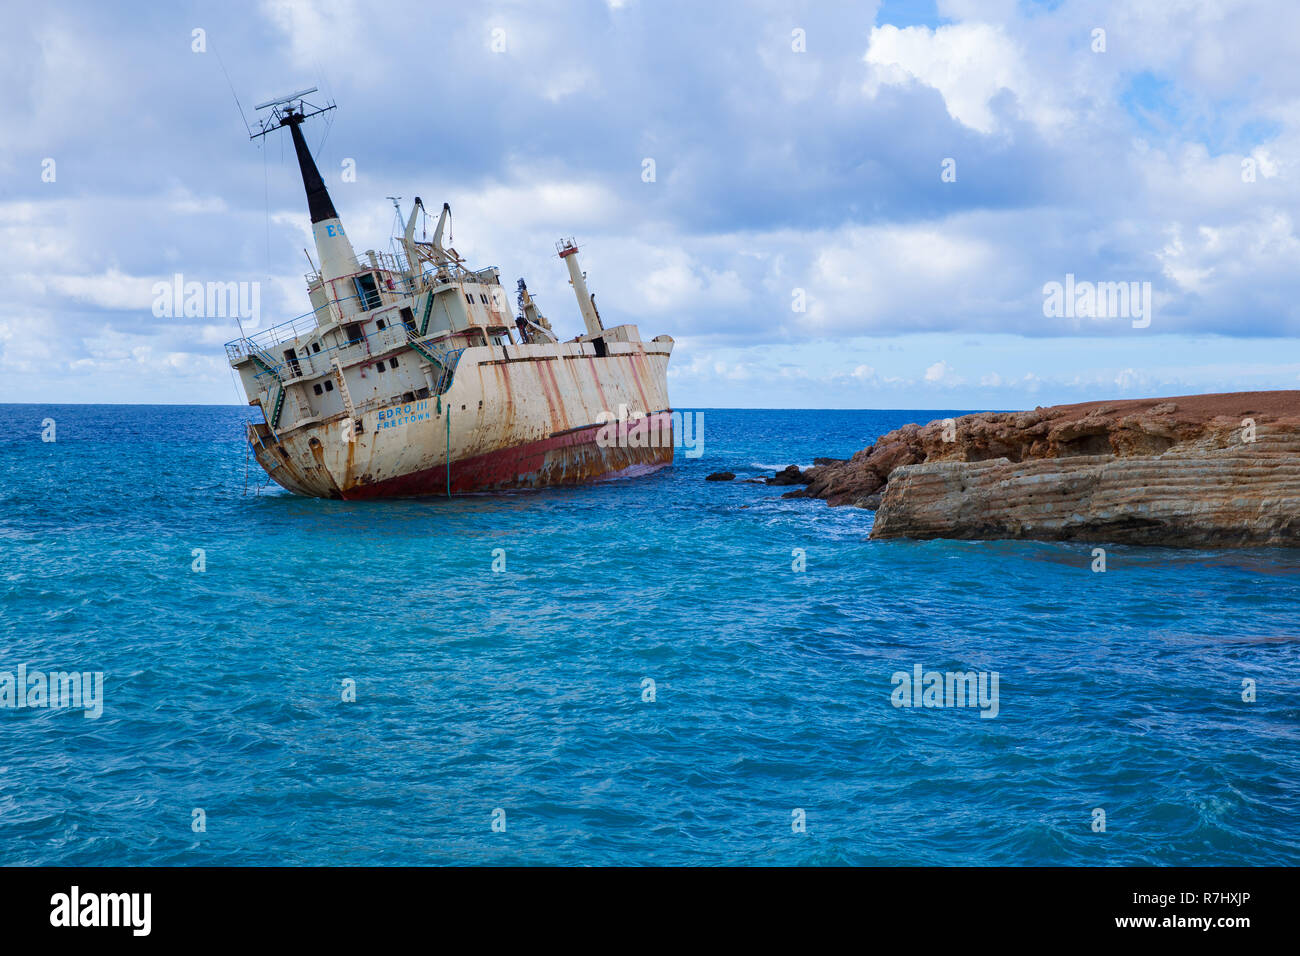 City Paphos, Cyprus. Old ship wreck and blue water beach. Travel photo 2018, december. Landscape and nature. Stock Photo